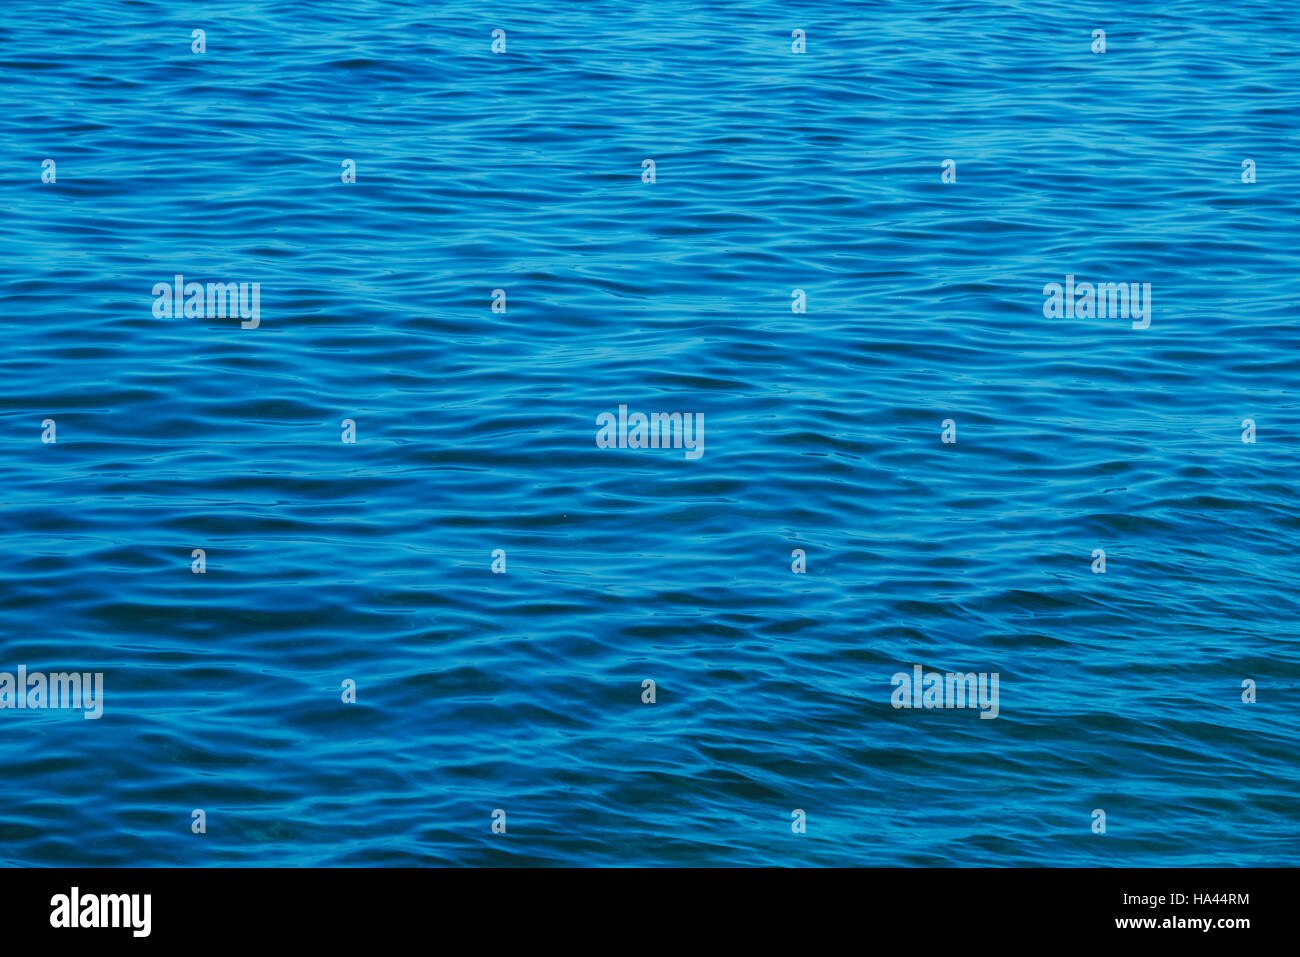 Sea water surface, seascape with ripples as dark blue abstract background Stock Photo